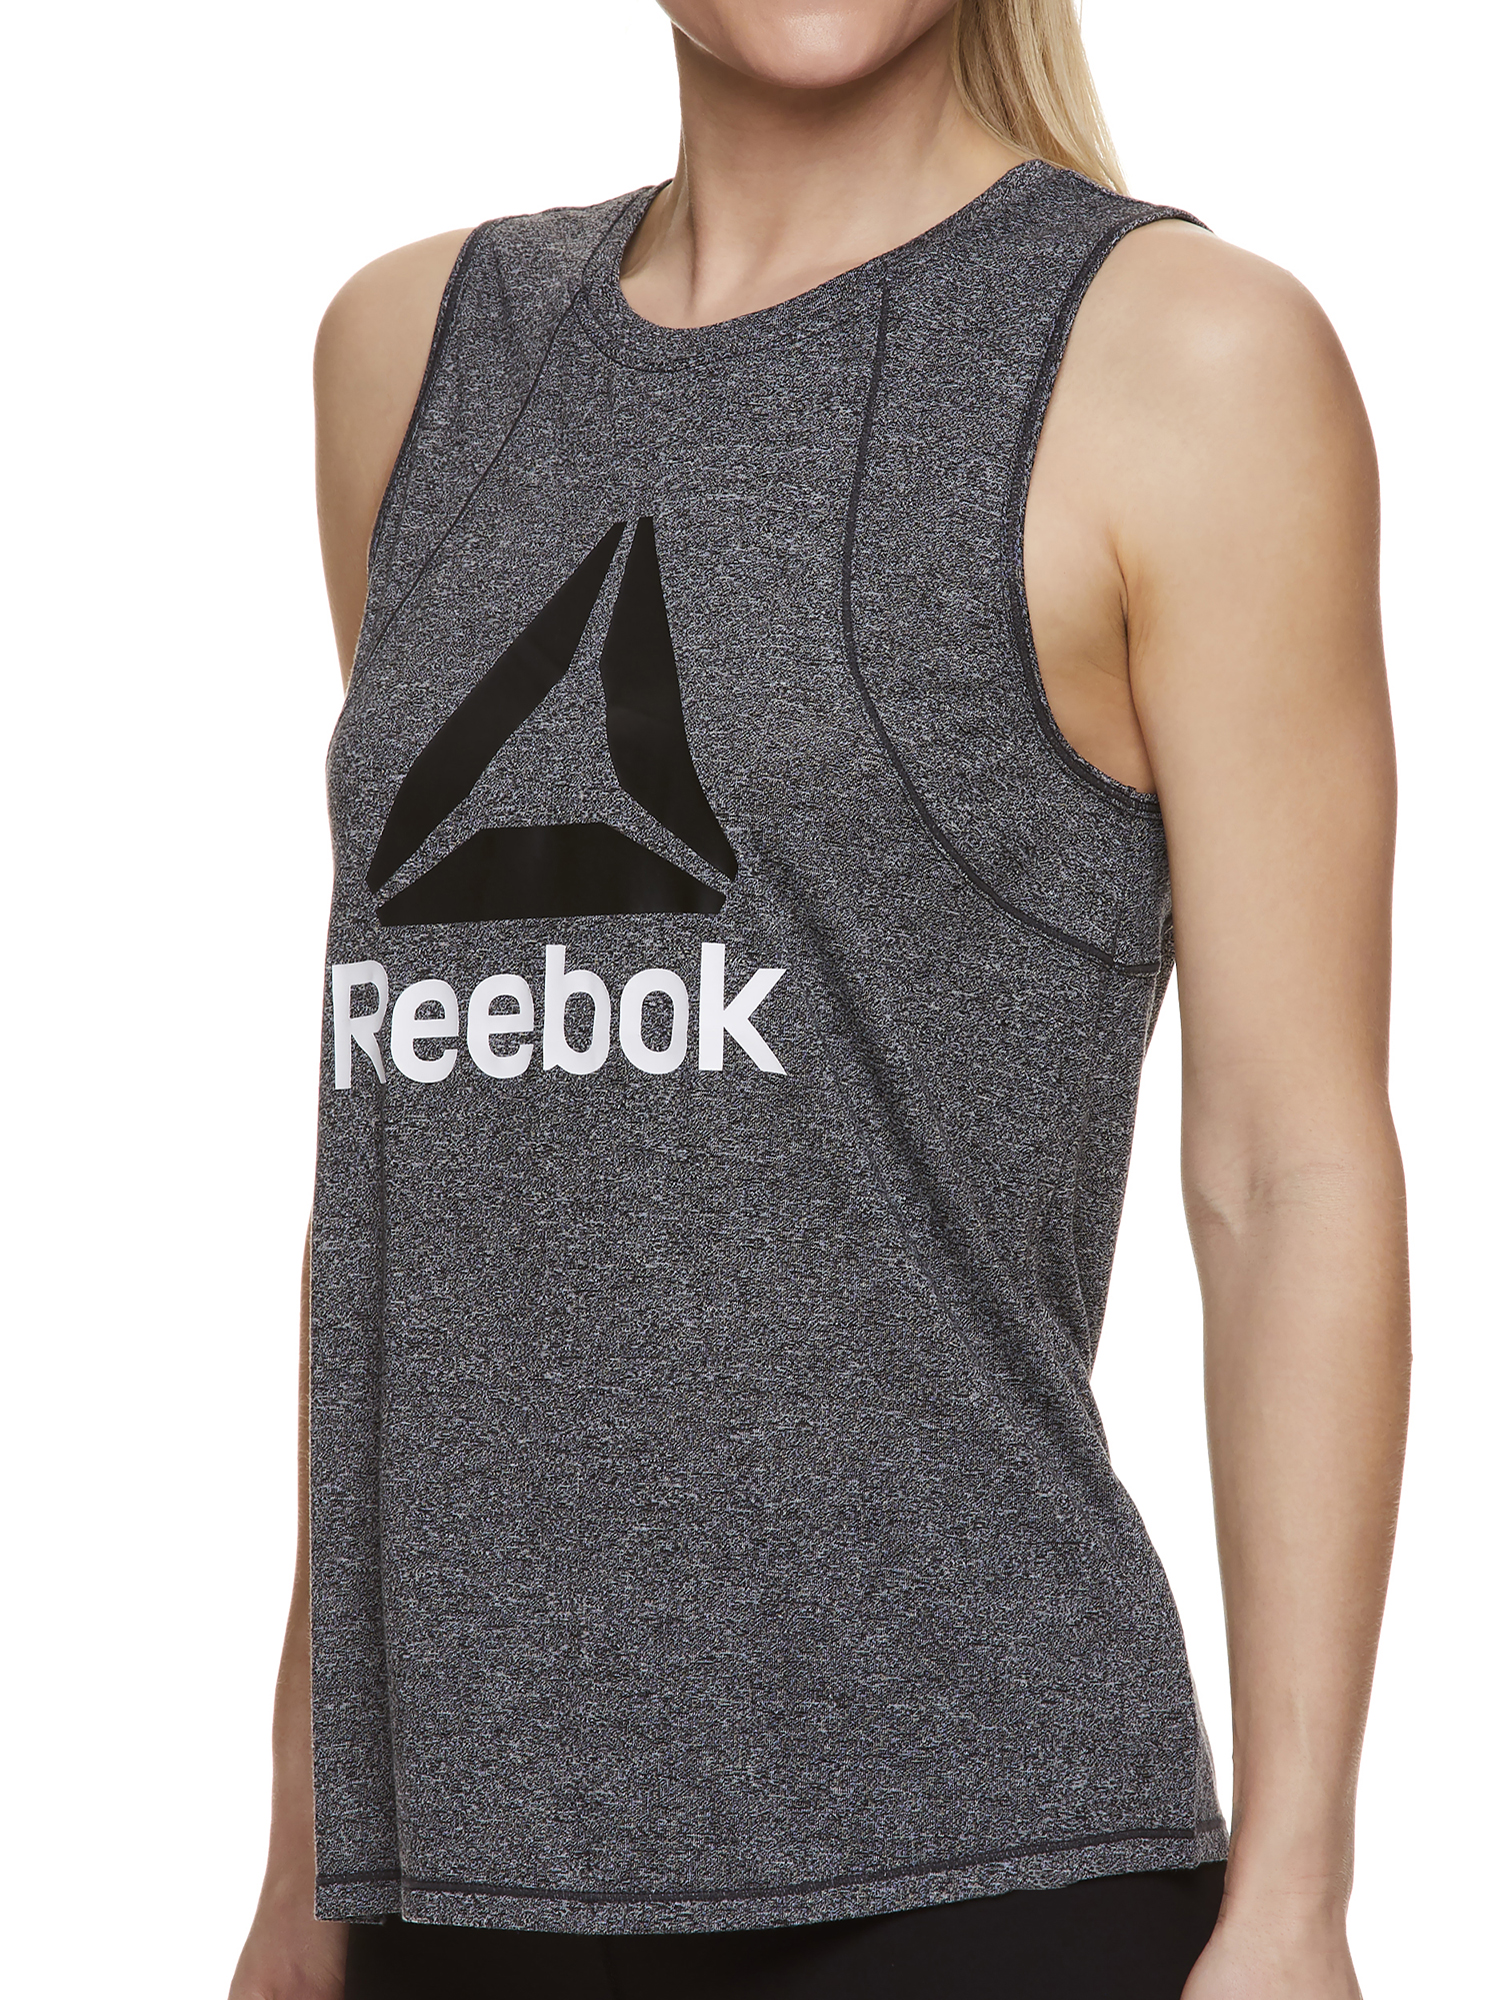 Reebok Womens Muscle Graphic Tank Top - image 3 of 4